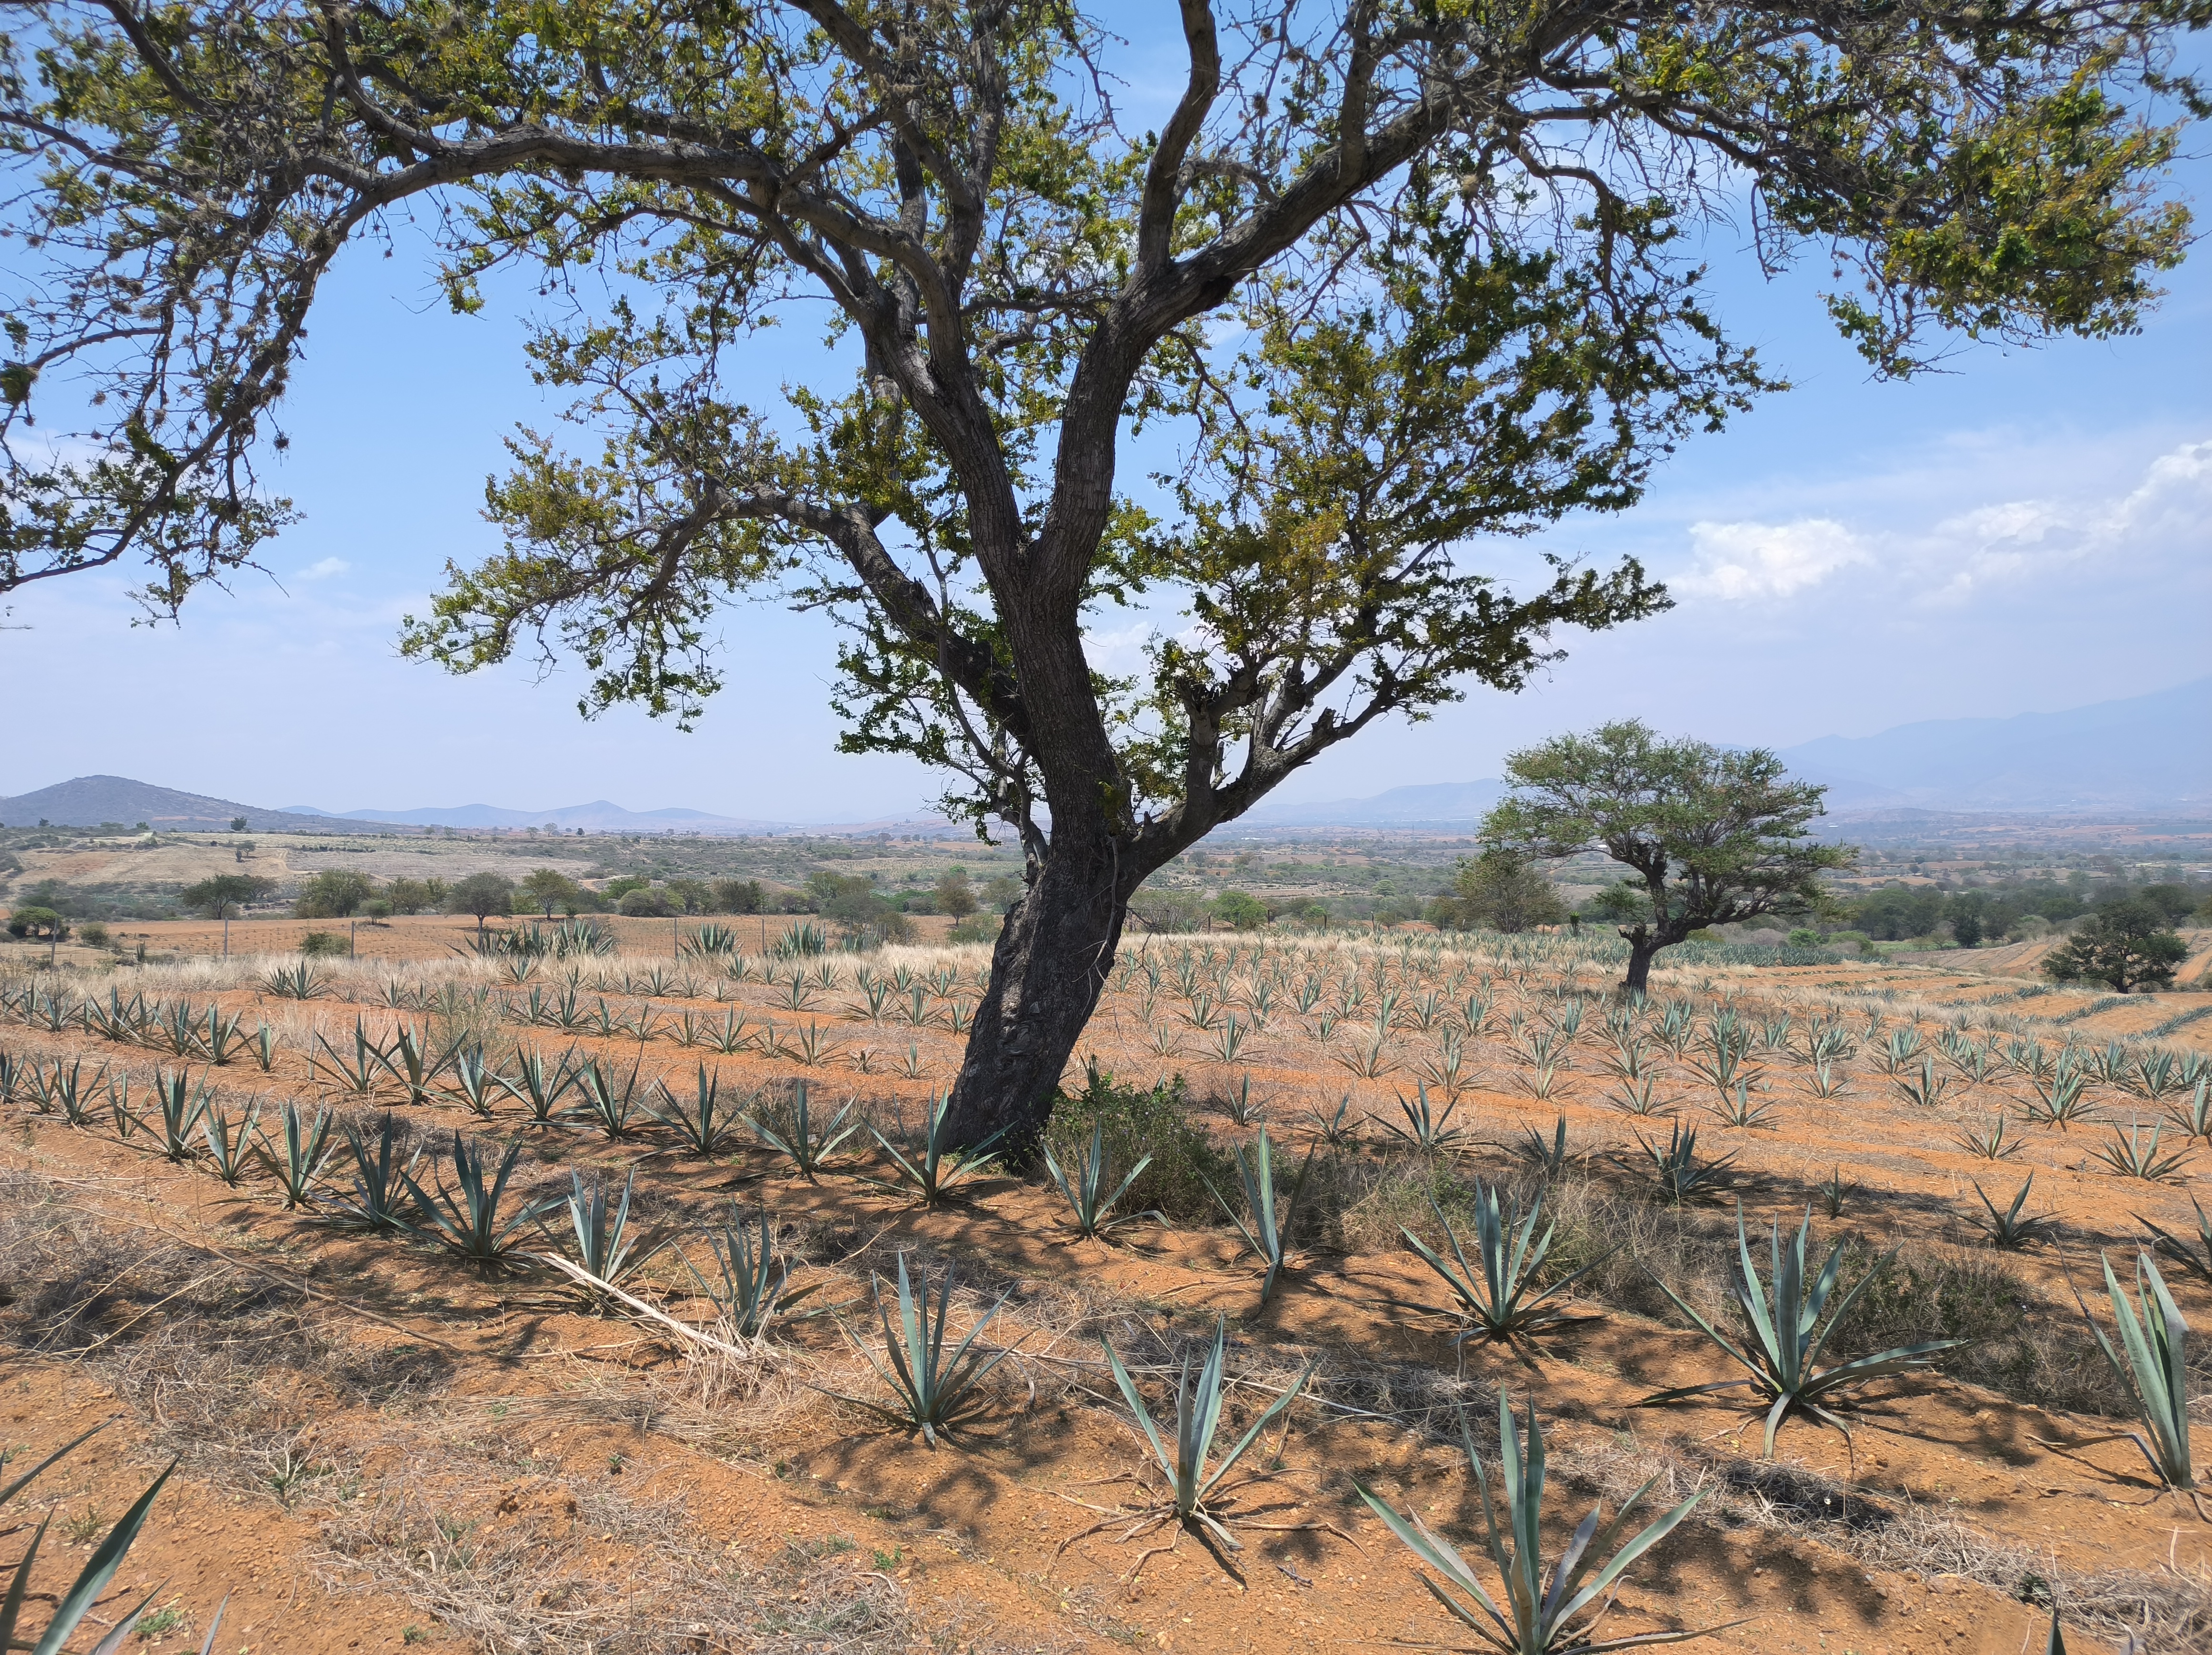 Agave plantation is mixed with trees, avoiding monocultures